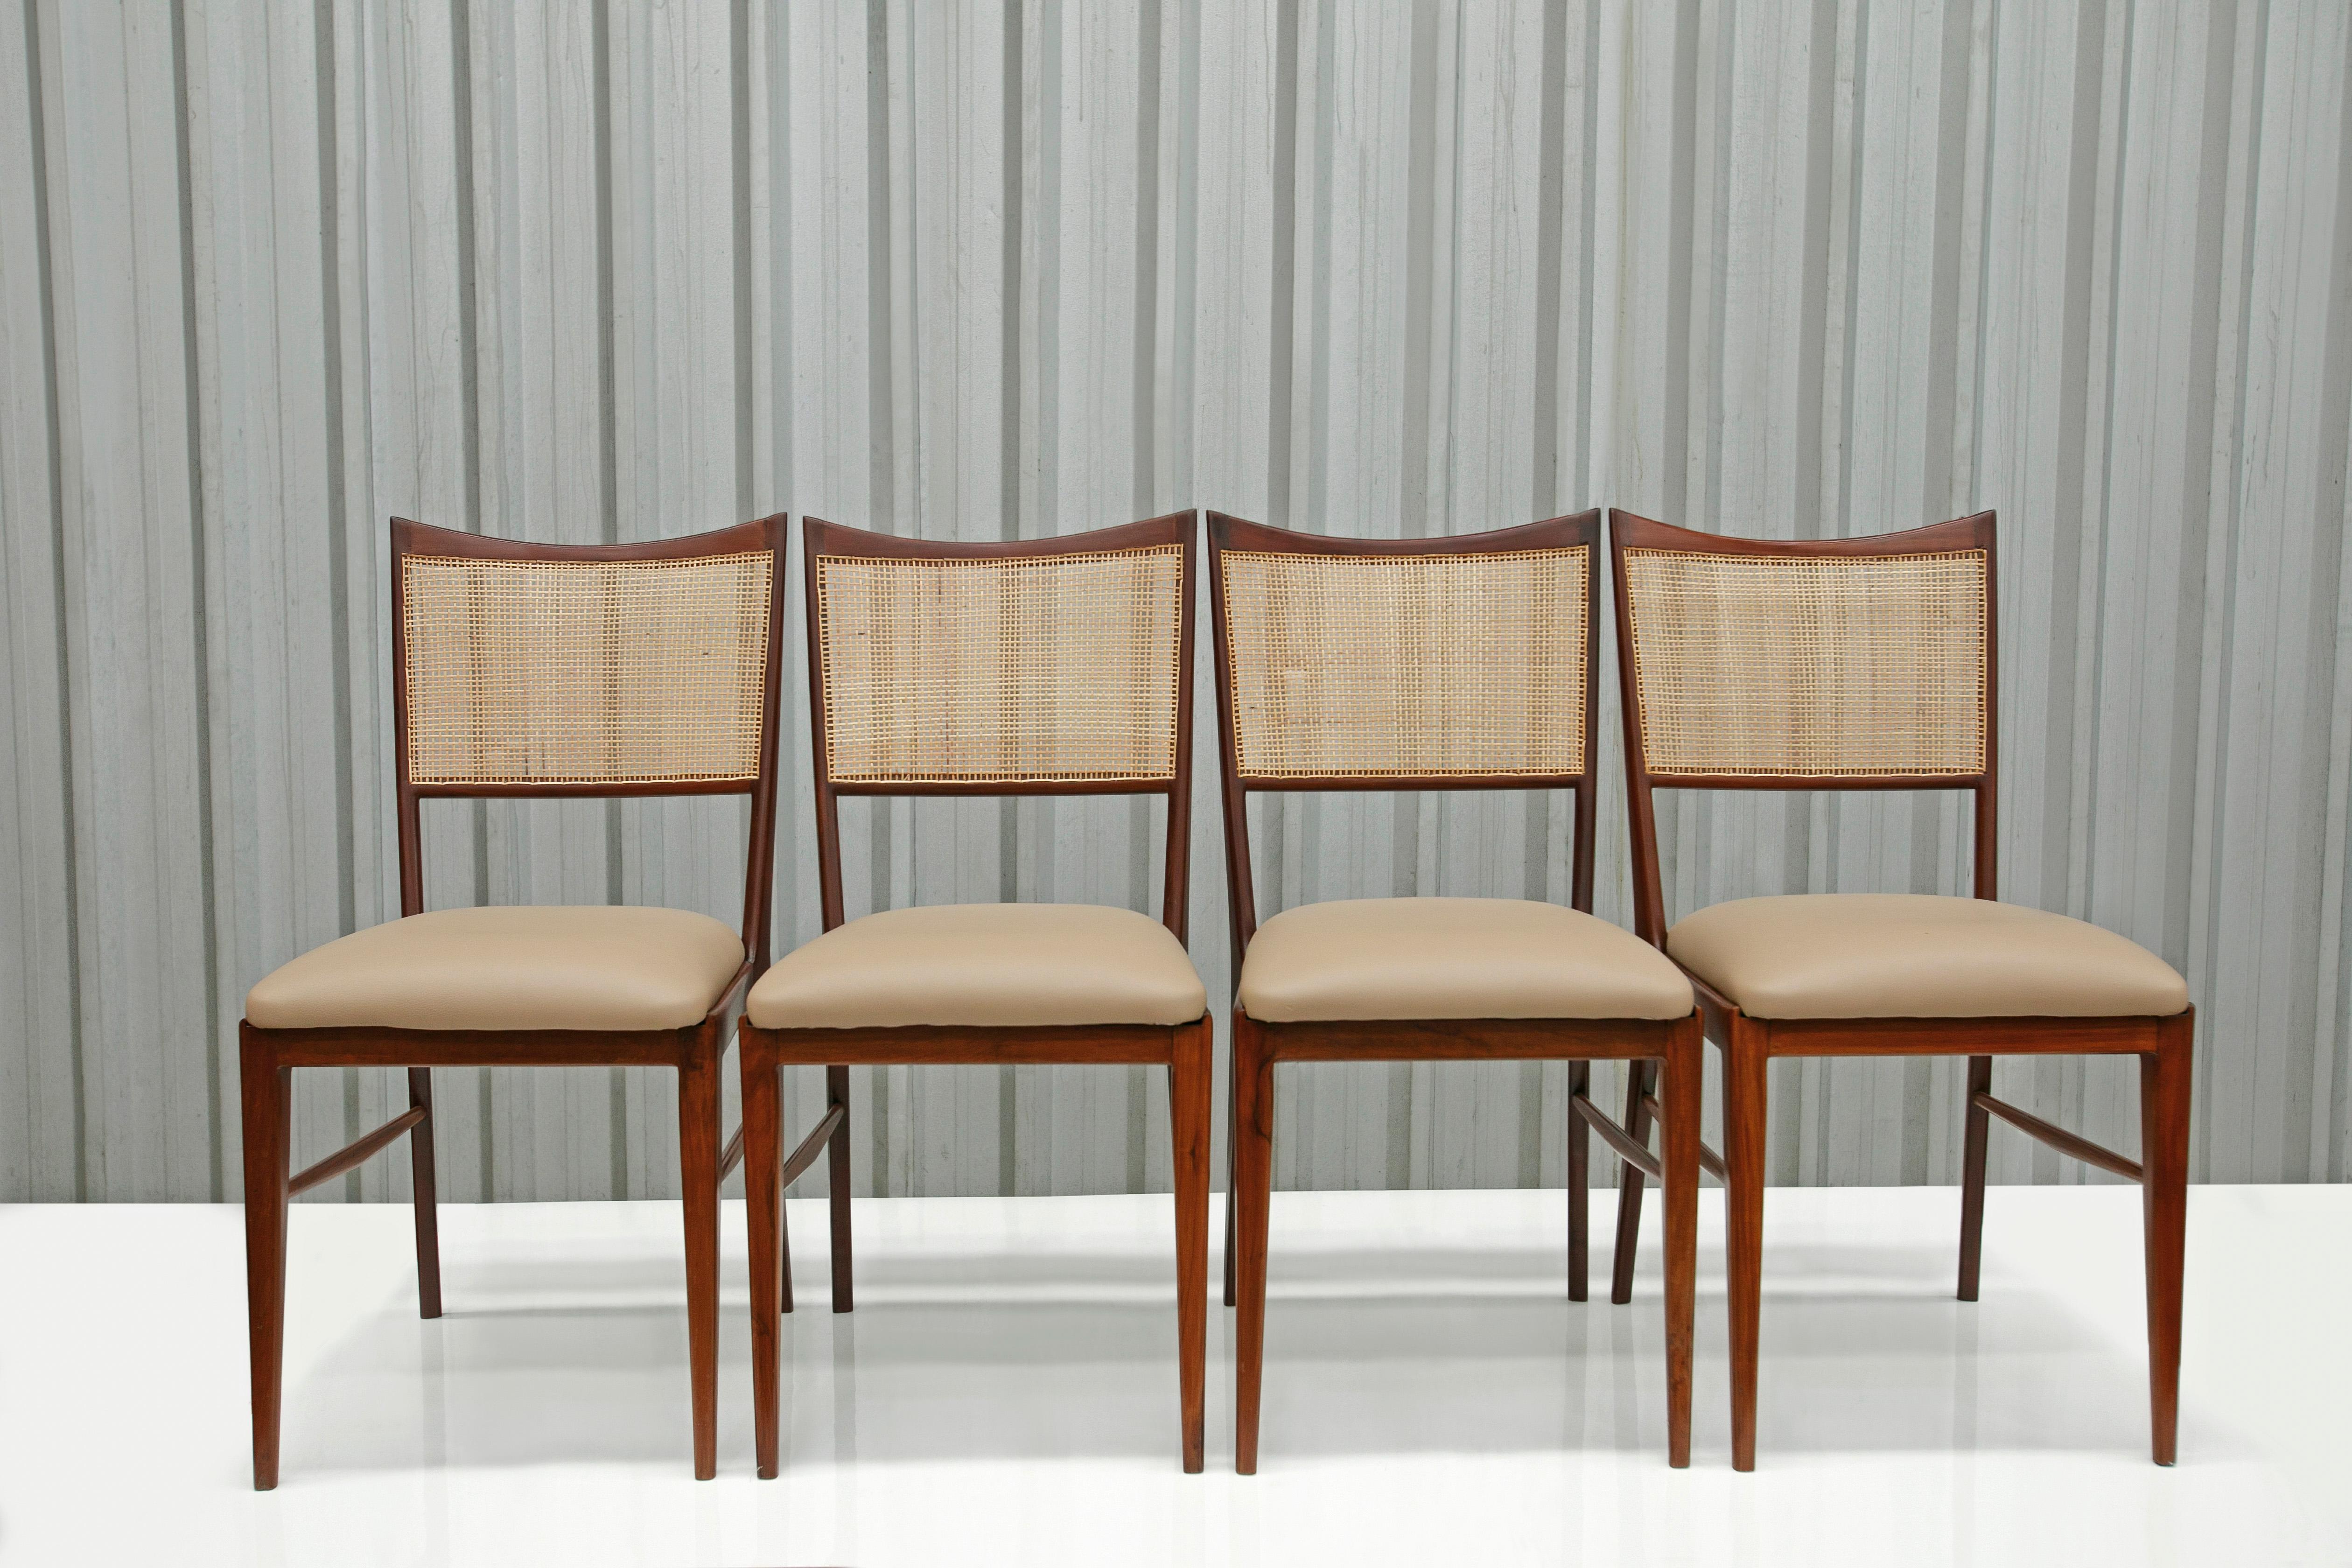 Mid-Century Modern Brazilian Modern Set of Four Chairs in Hardwood & Beige Leather, Unknown, 1960s